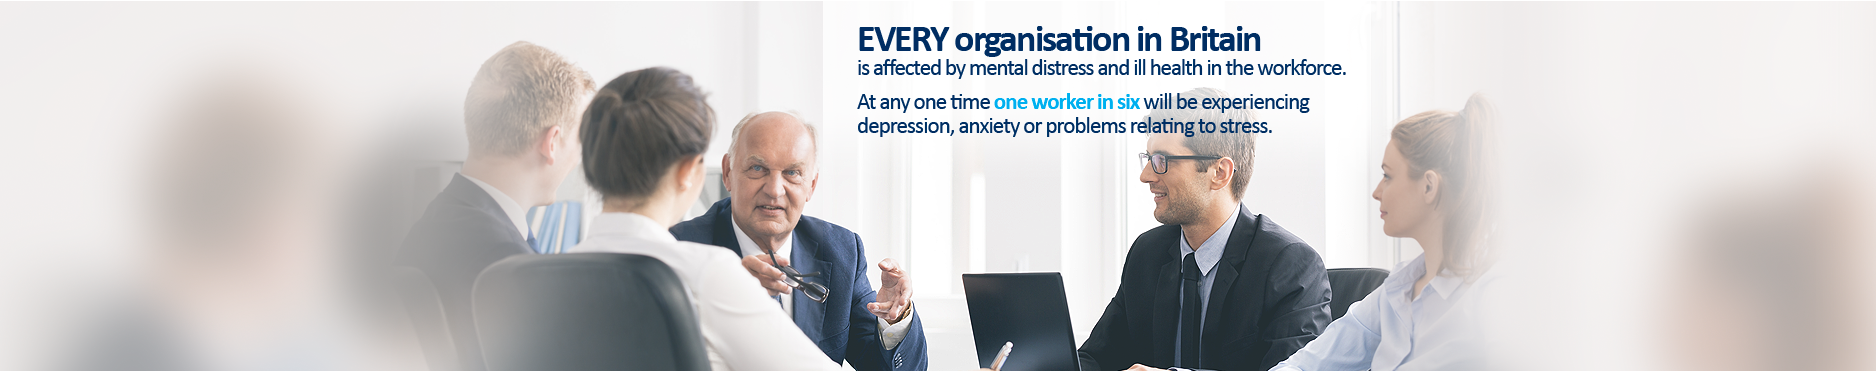 EVERY organisation in Britain is affected by mental distress and ill health in the workforce. At any one time one worker in six will be experiencing depression, anxiety or problems relating to stress. 